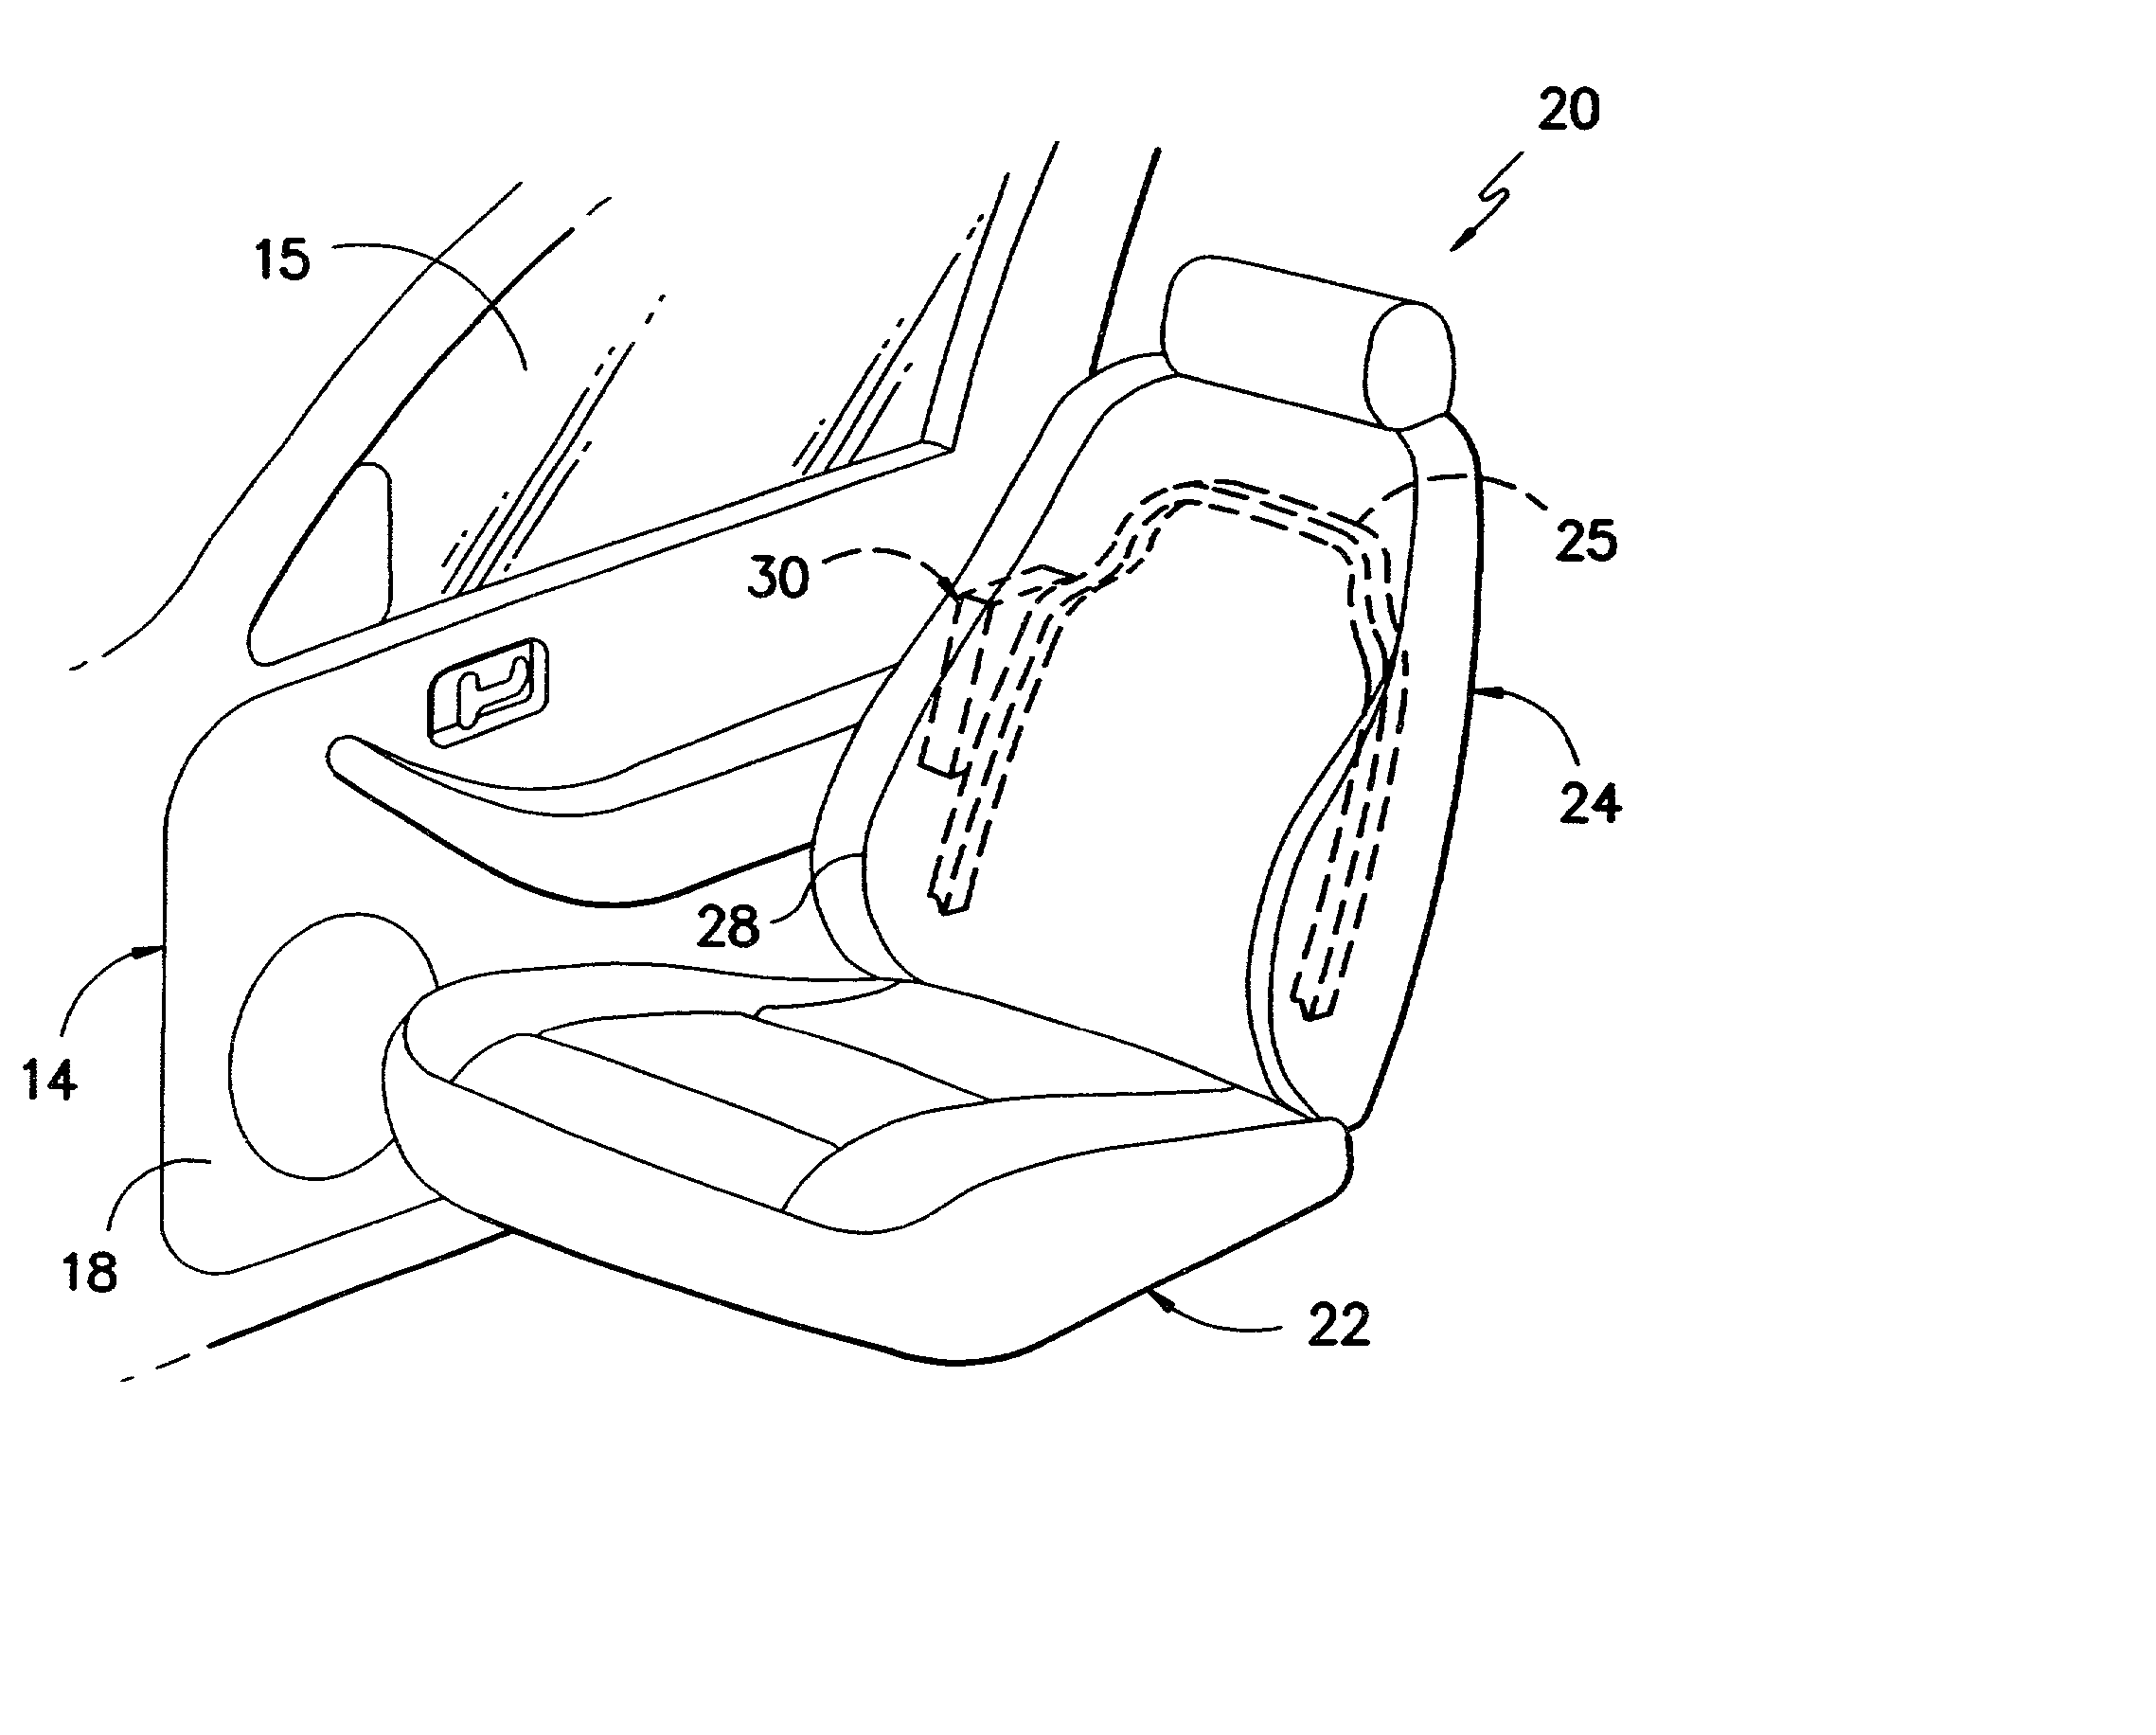 Bias flap for side air bags